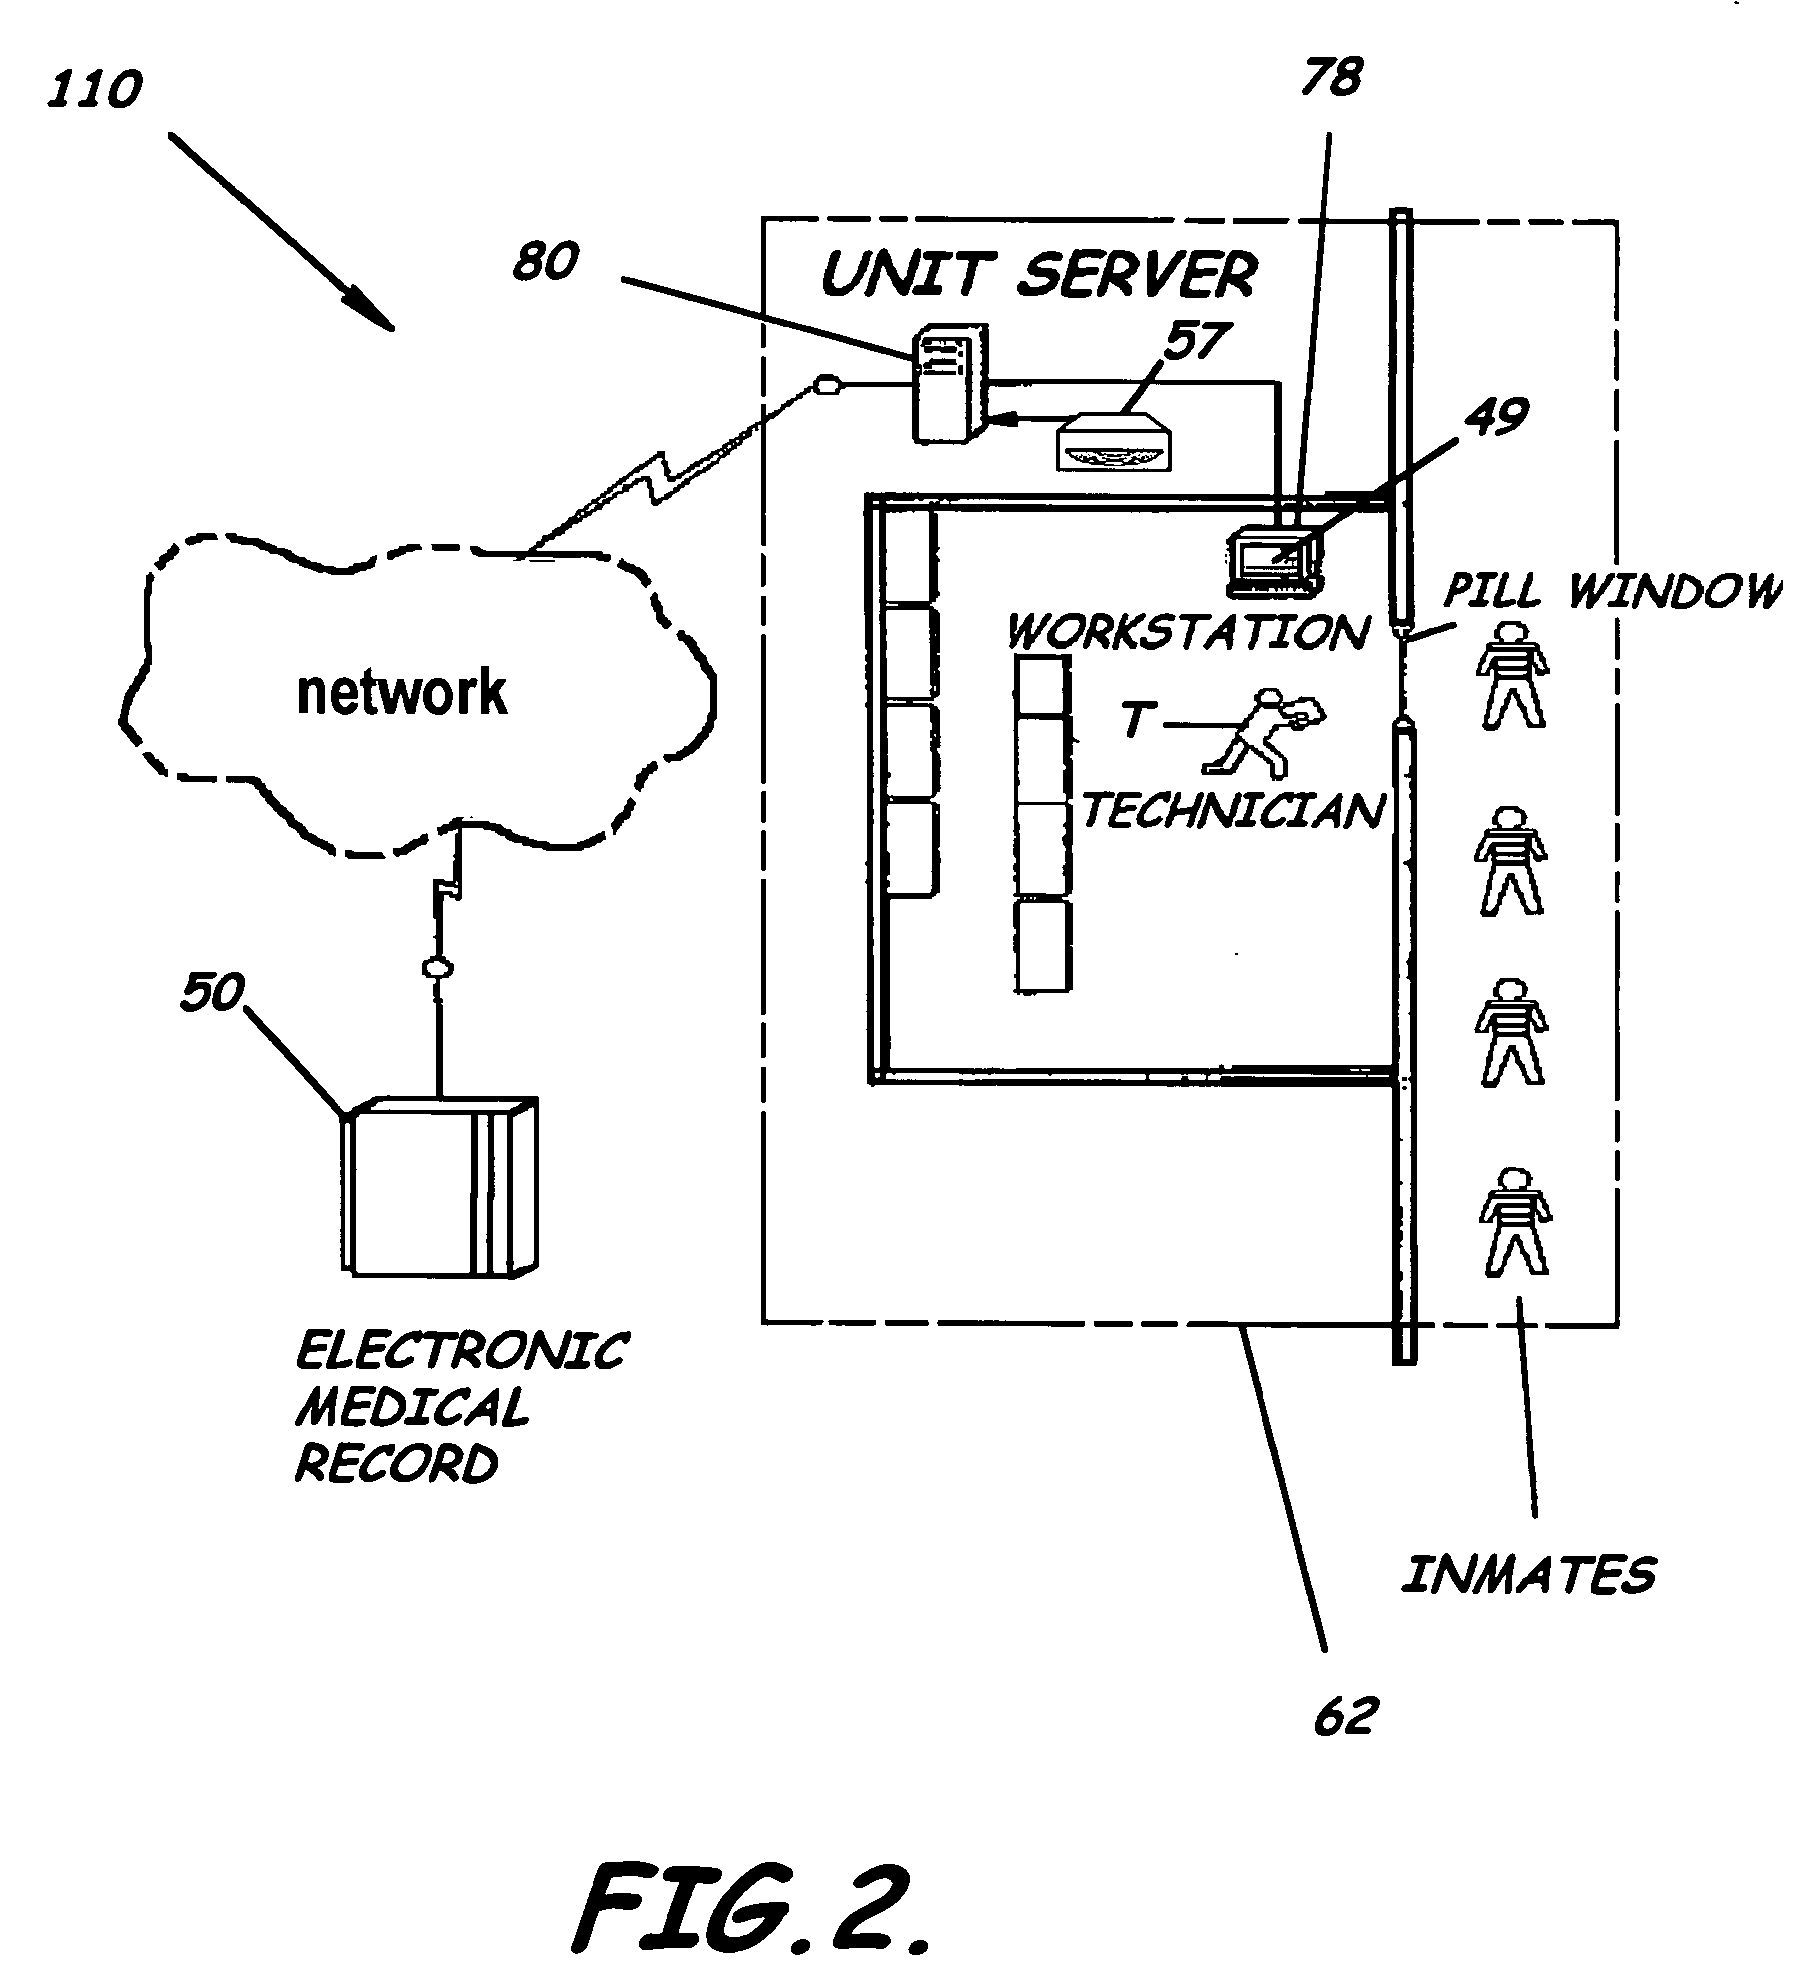 Pharmaceutical inventory and dispensation computer system and methods